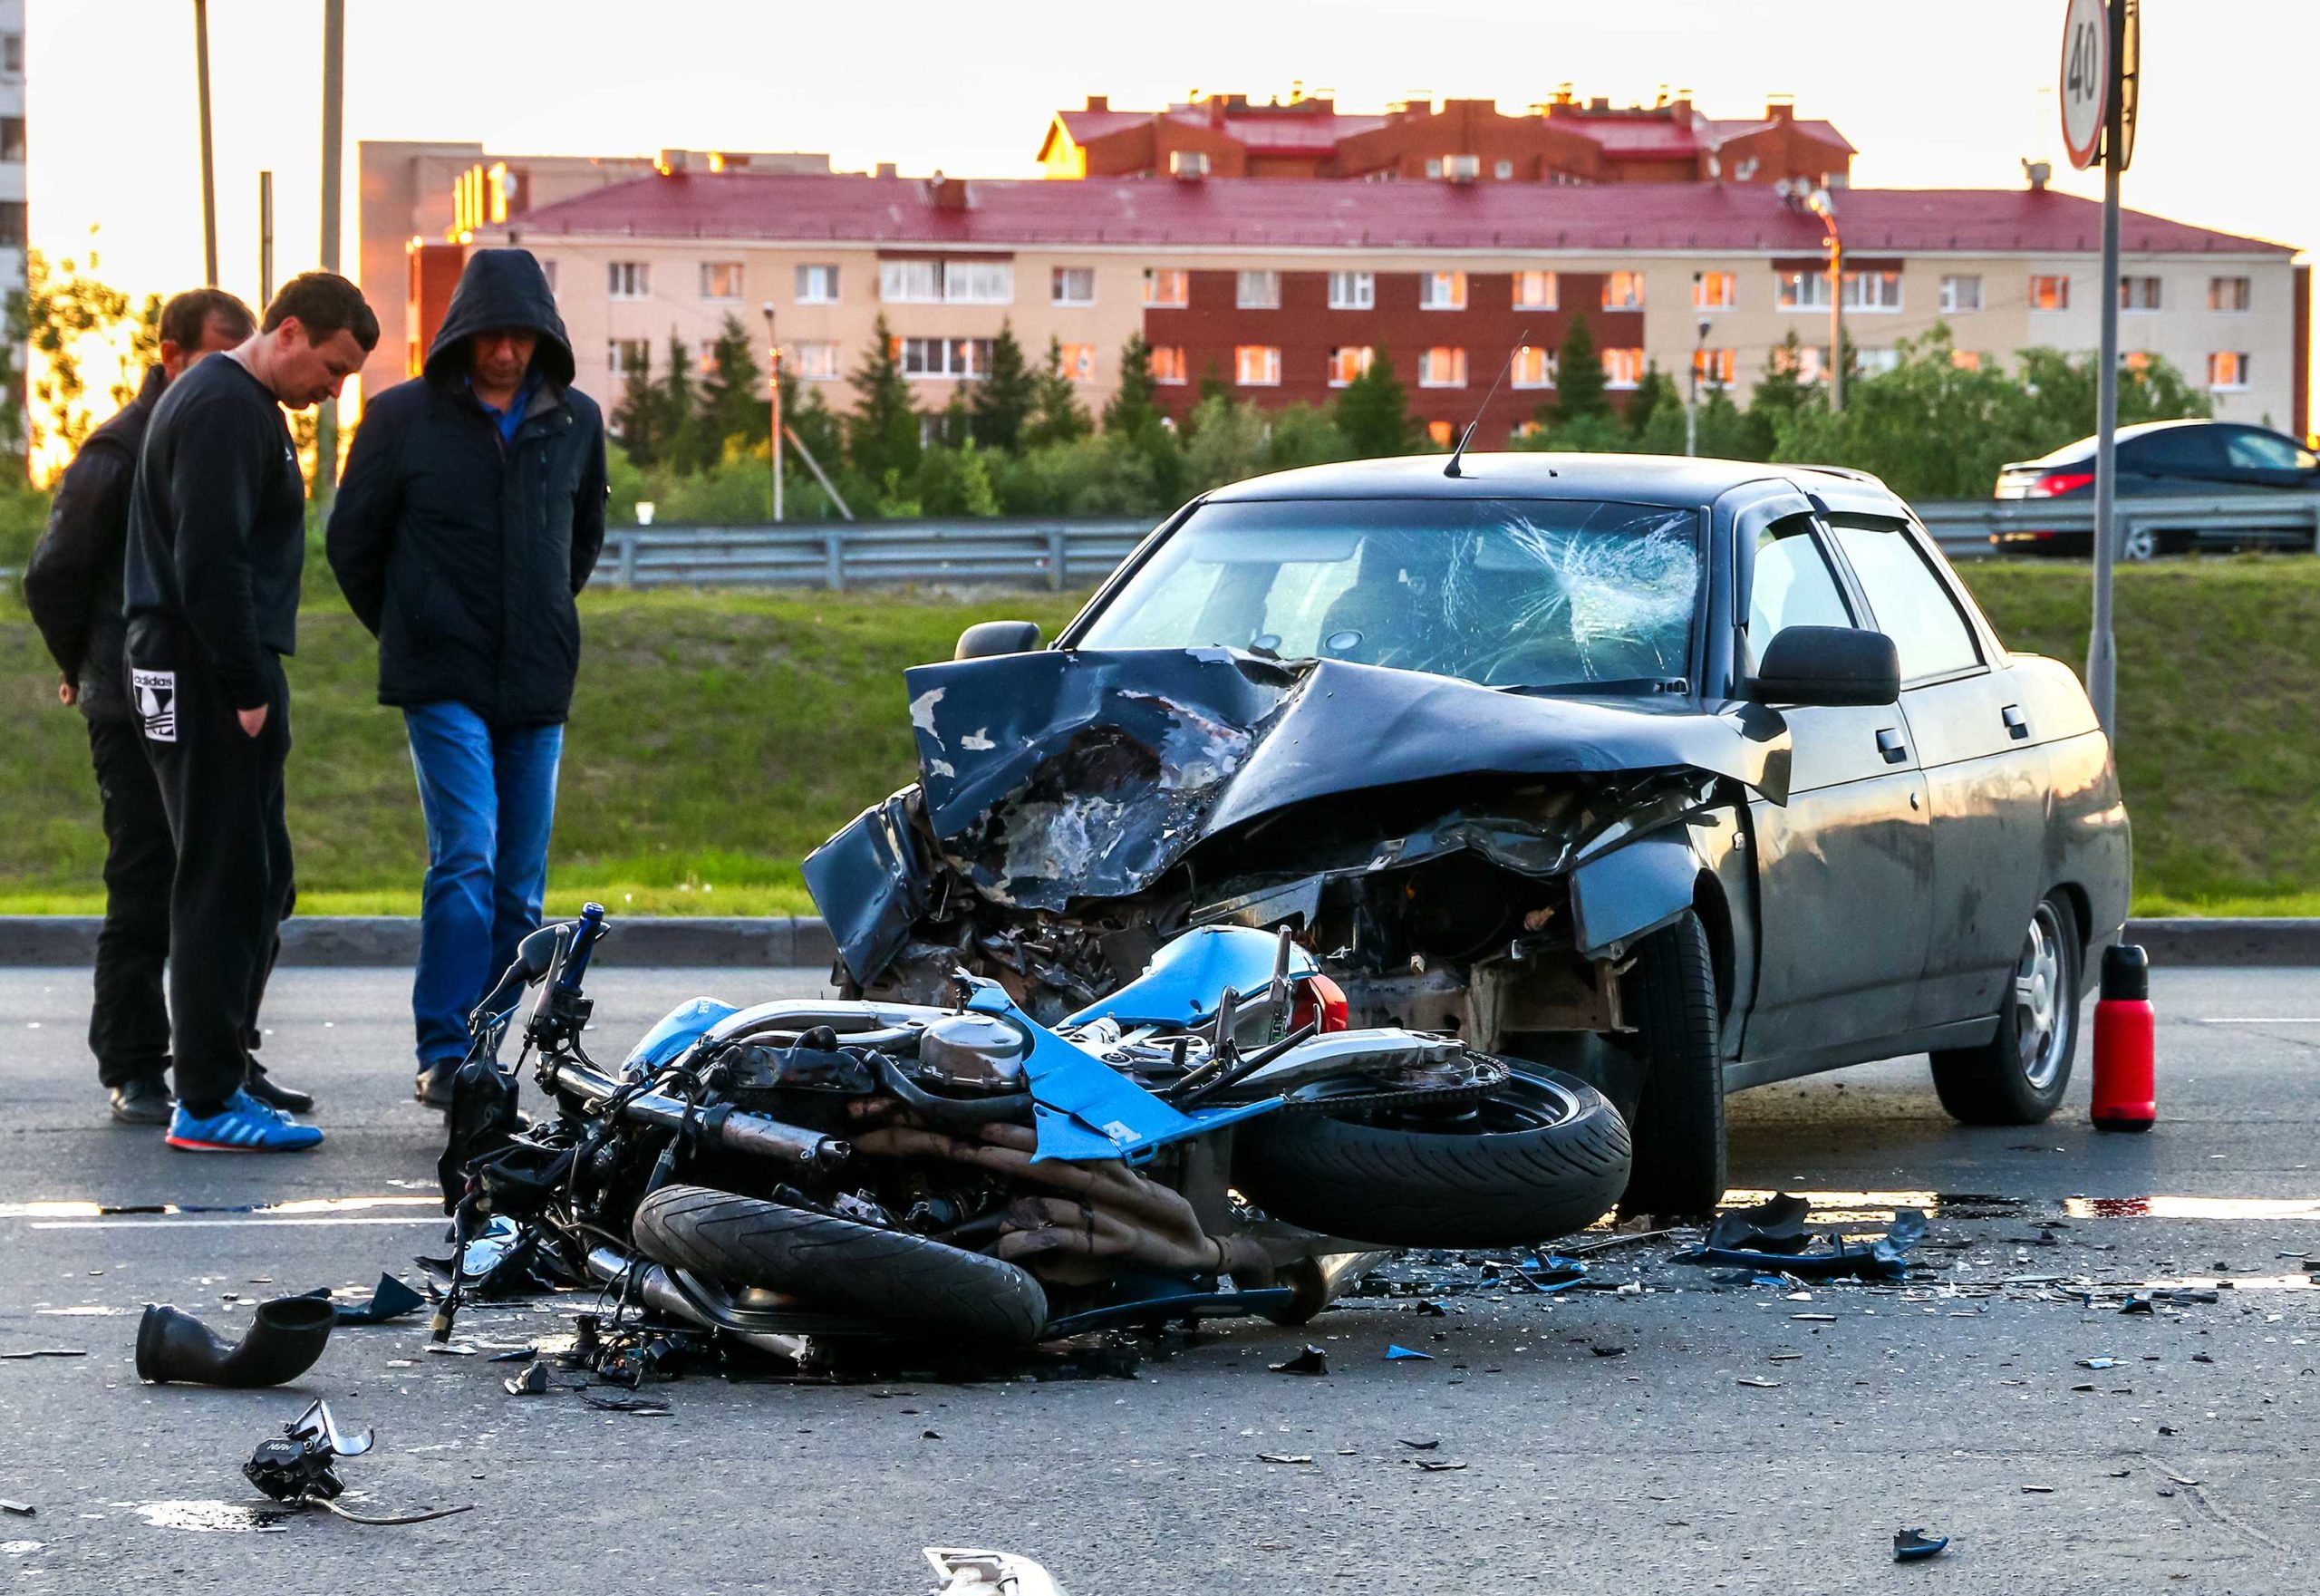 What Causes Most Motorcycle Accidents with Cars?